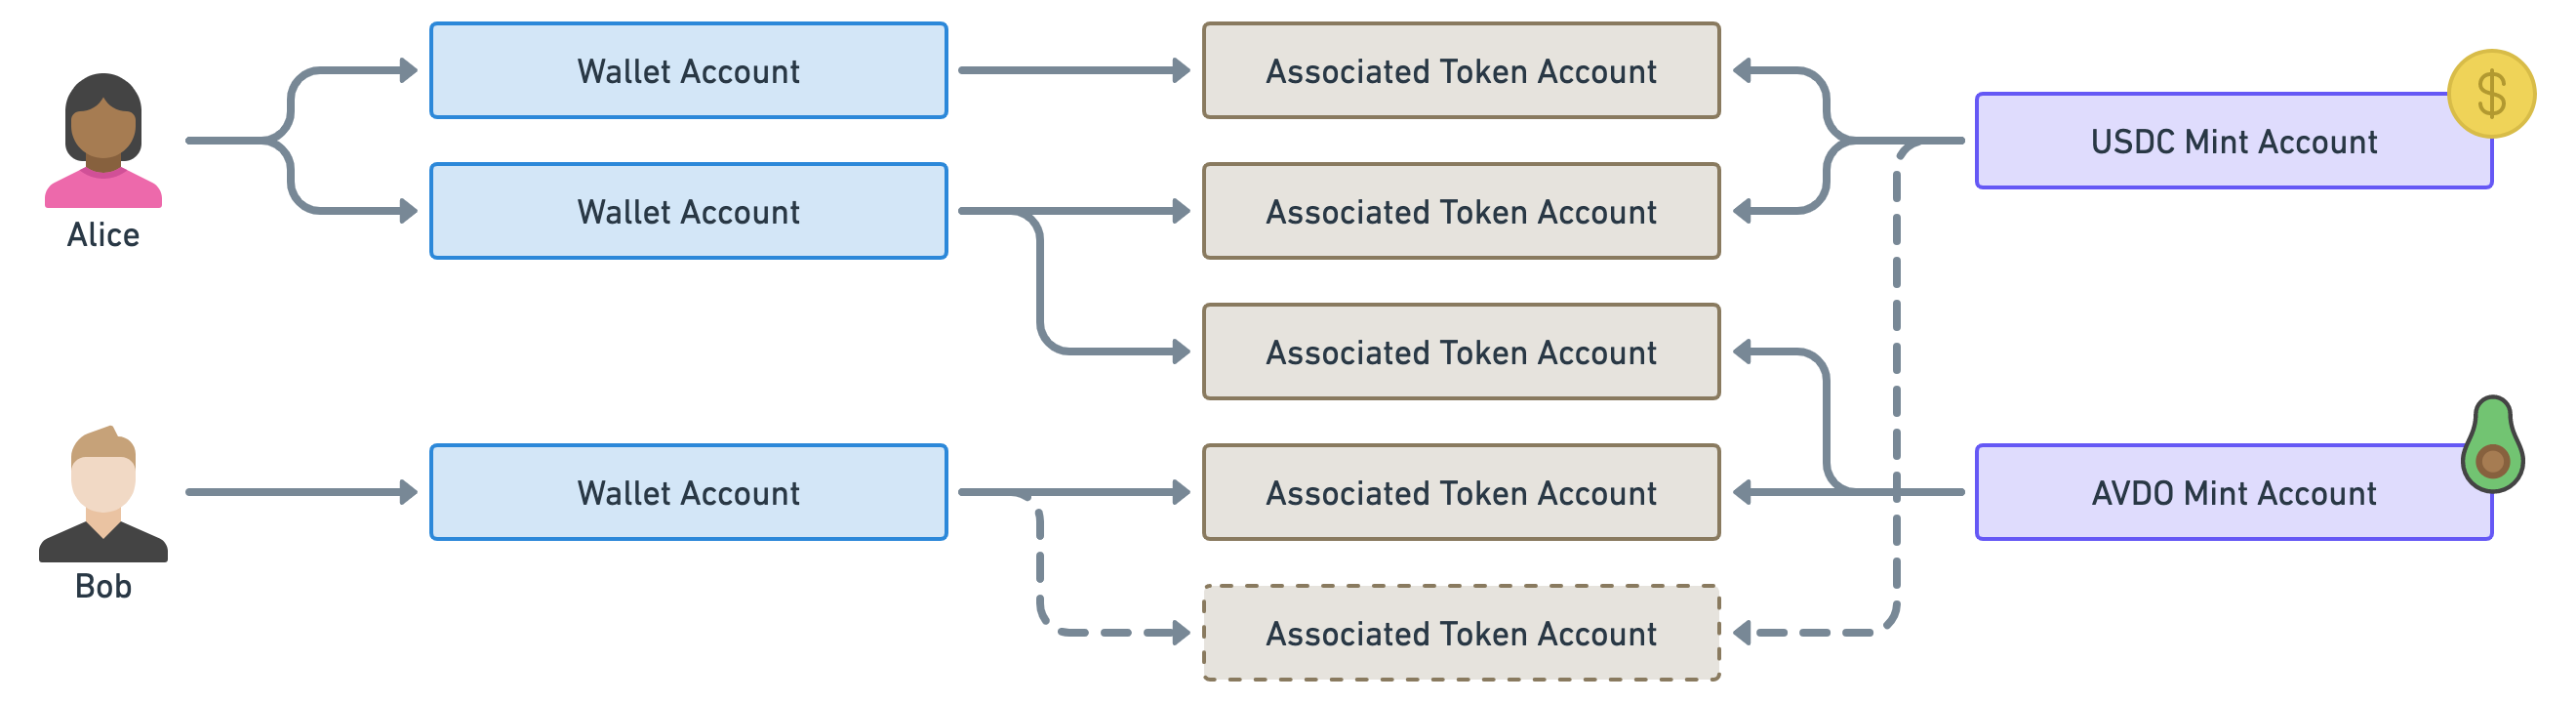 Example diagram showing Alice owning two wallet accounts. The first one is linked to the “USDC Mint Account” via one associated token account. The second one is linked to the USDC and AVDO Mint Accounts via one associated token account each. Bob owns only one wallet account that is linked to AVDO via one associated token account. Bob’s wallet is also linked to the USDC mint account via an associated token account represented as a dashed rectangle to show it does not exist yet. The arrow pointing to that rectangle is also dashed.